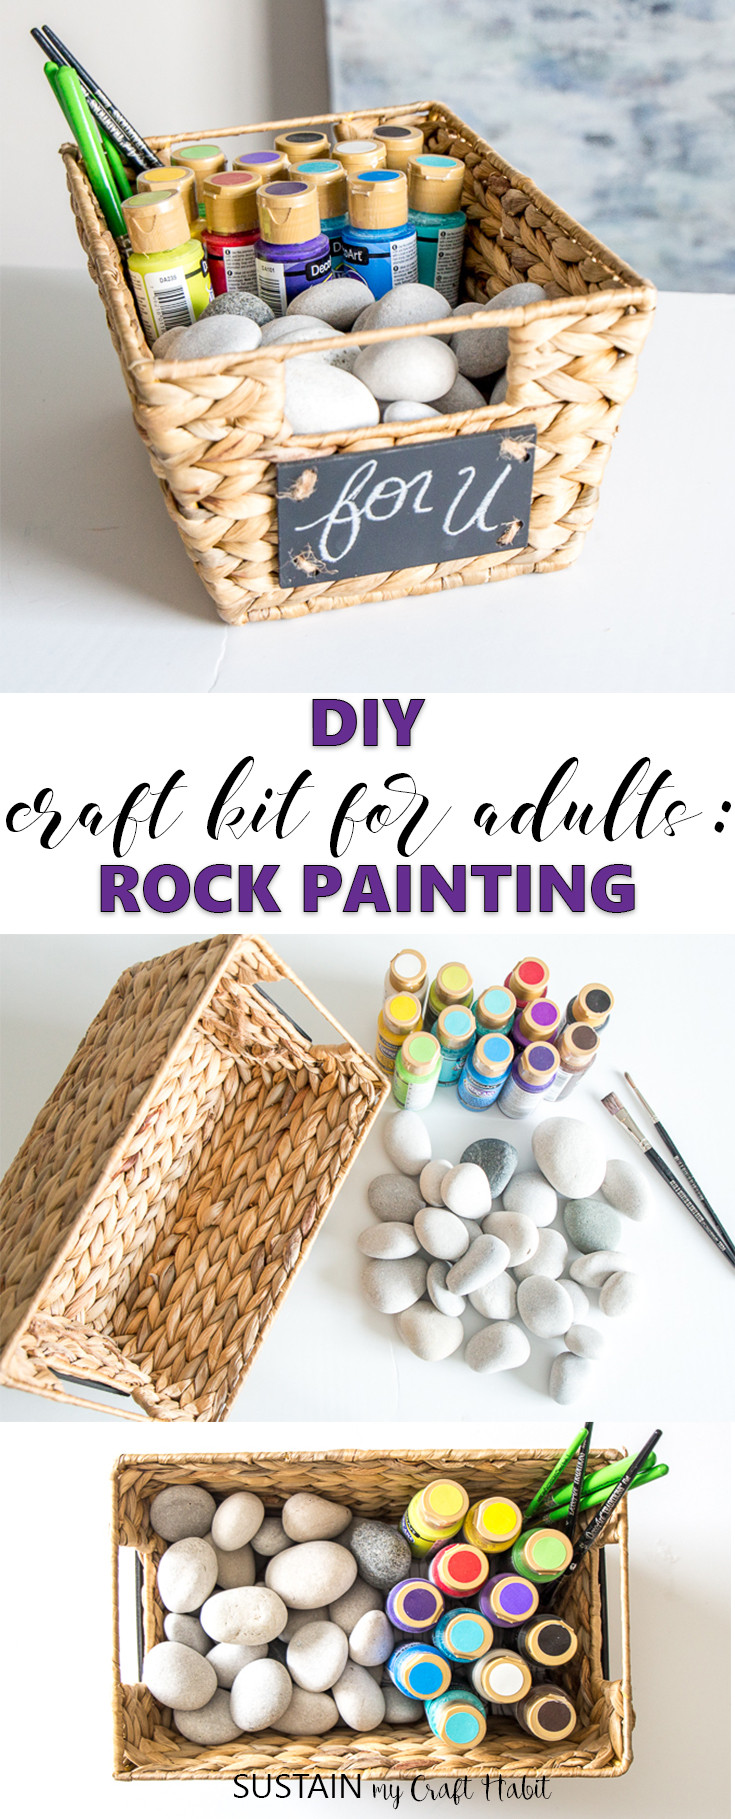 Rock Crafts For Adults
 Make your Own Craft Kit for Adults Rock Painting